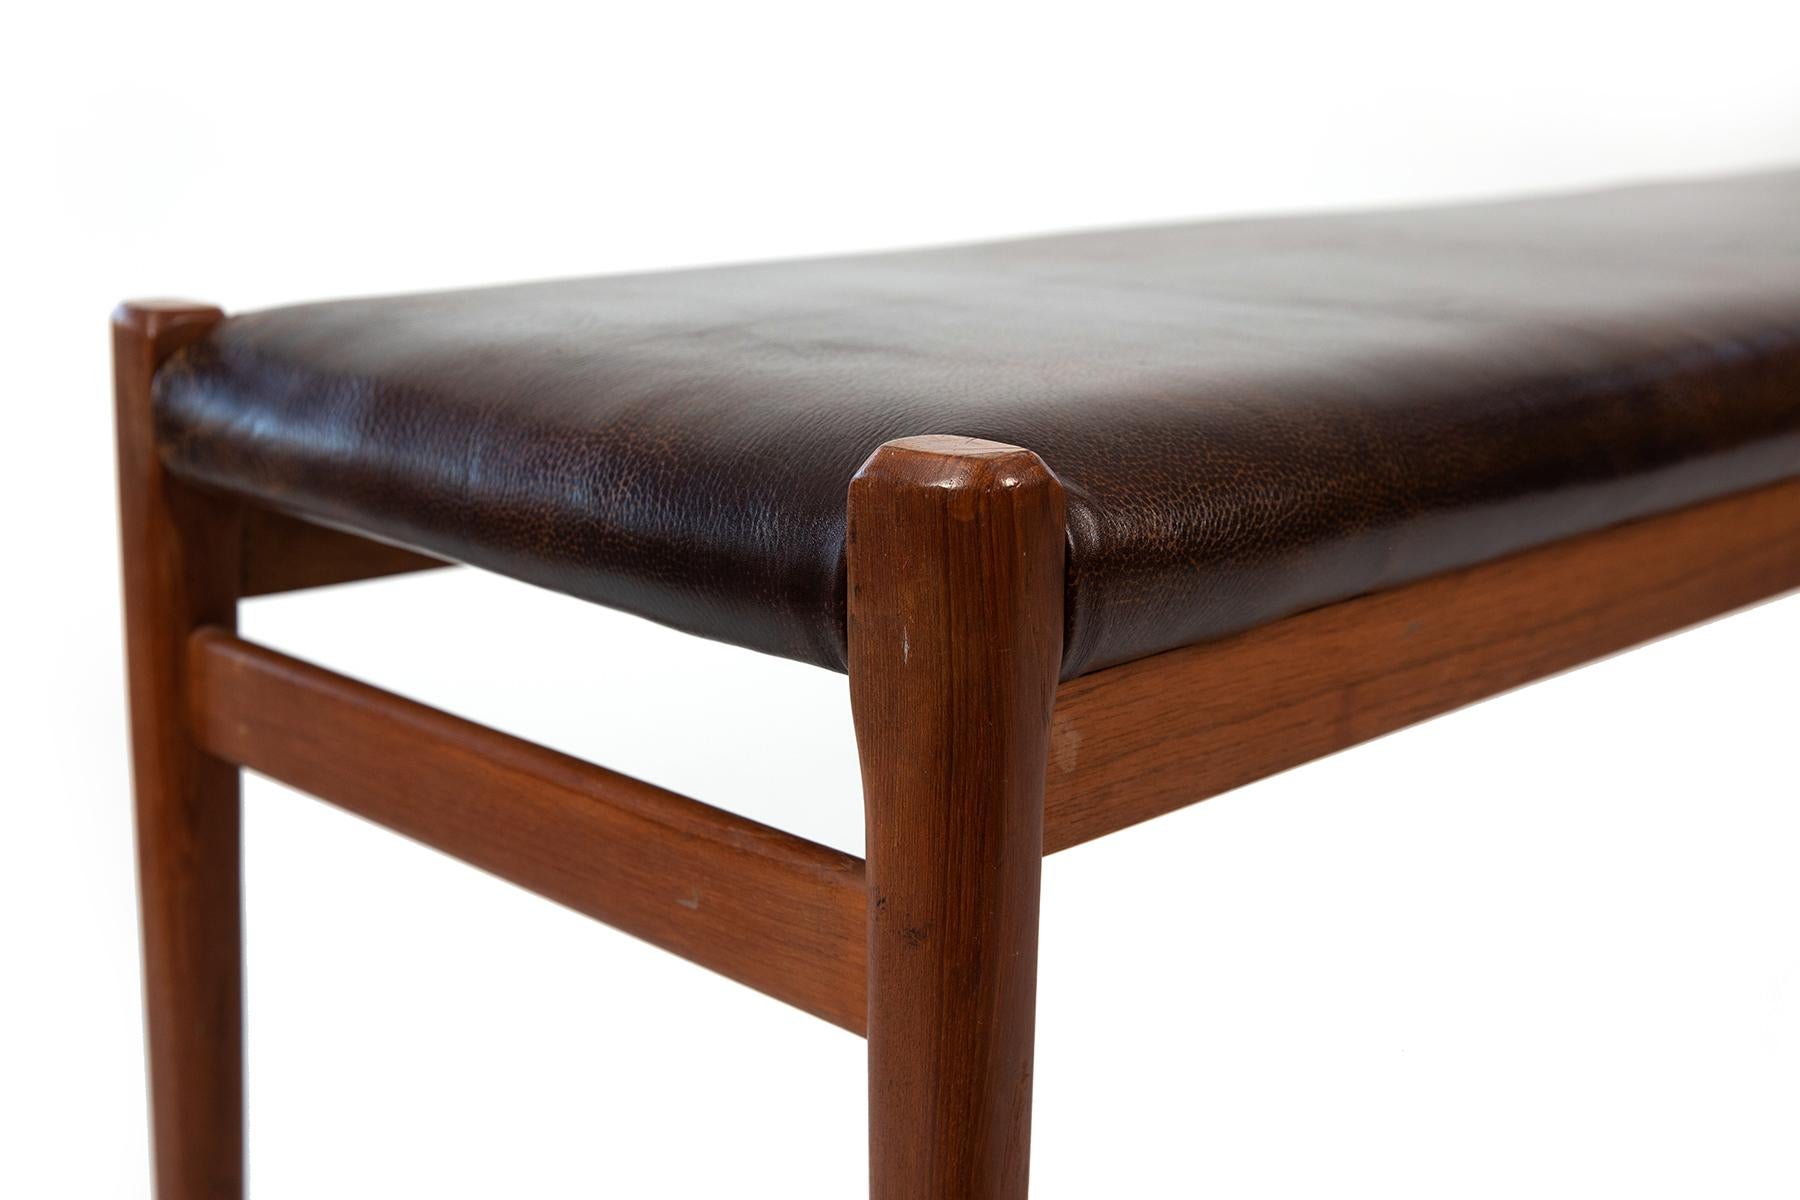 Niels Moller teak and leather bench circa mid-1960s. Original finish to solid teak frame and newly upholstered in a beautifully patinated leather.